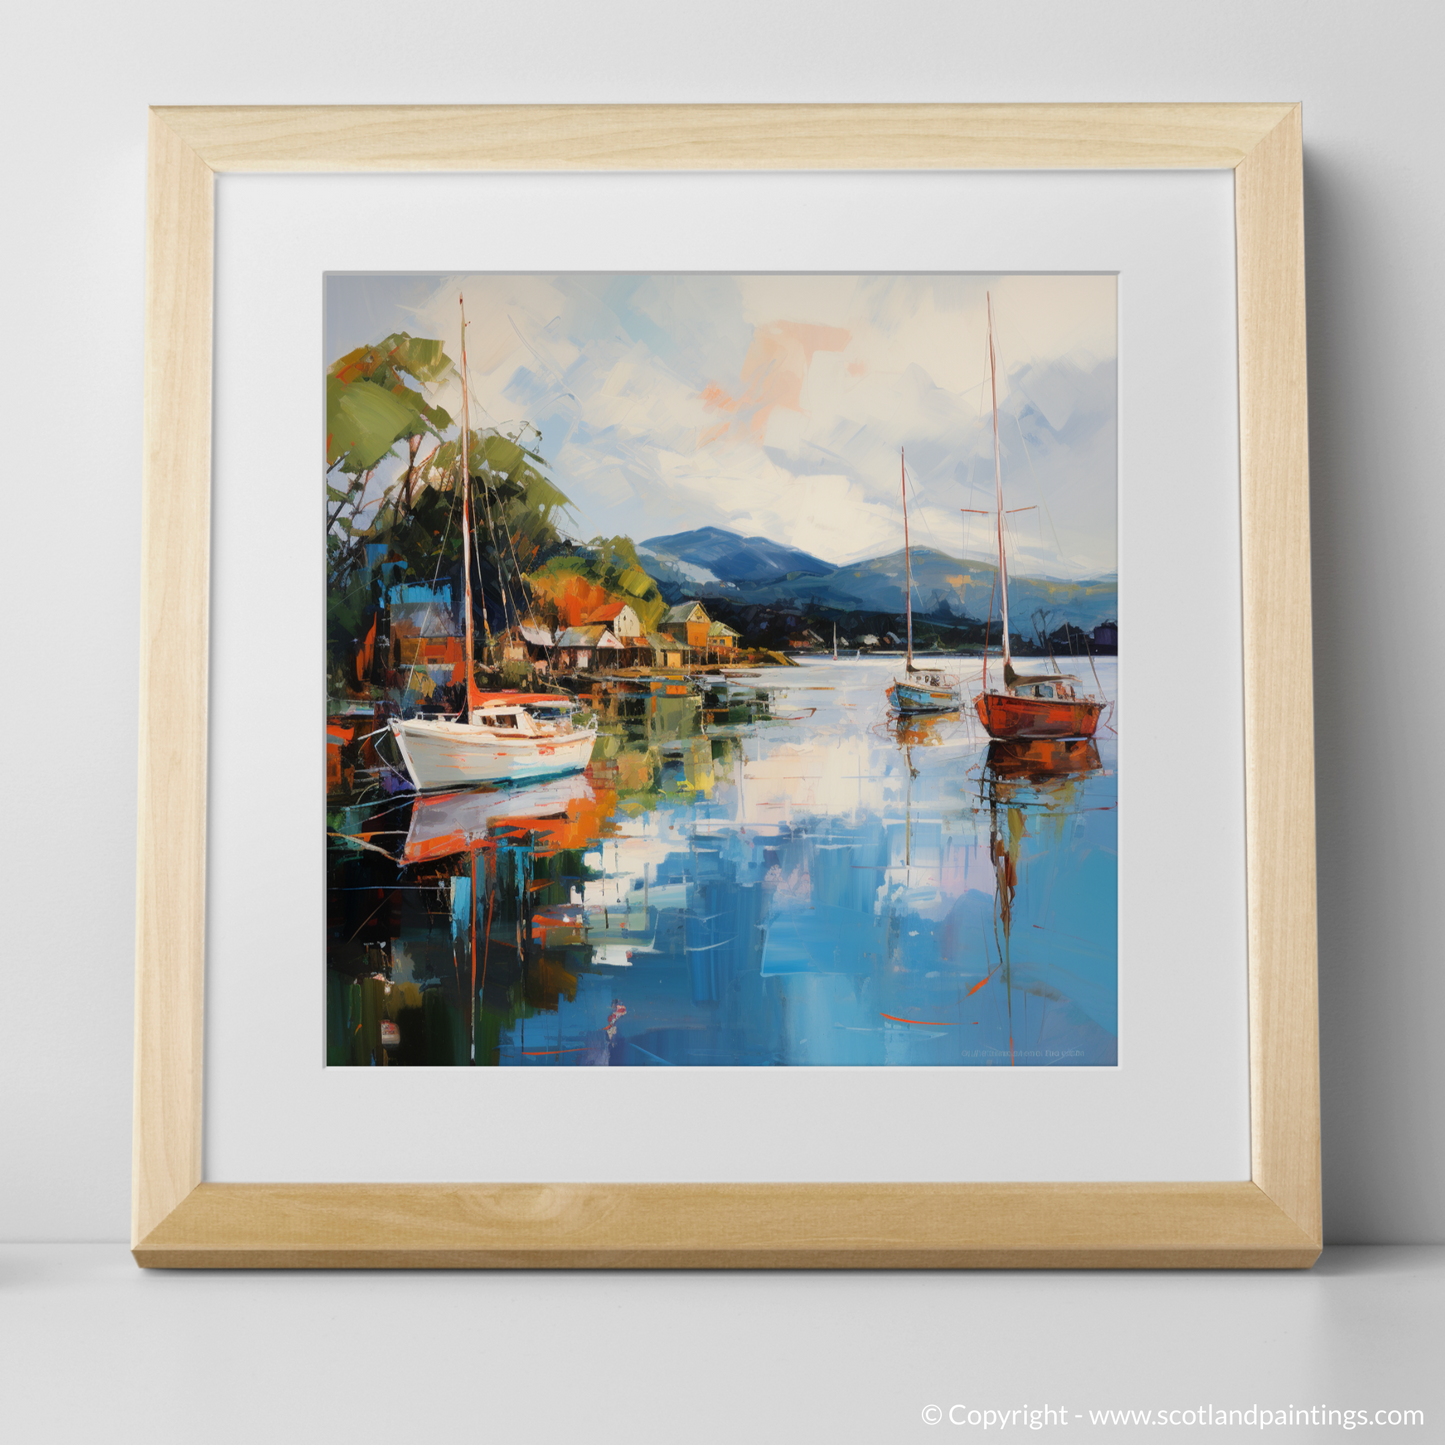 Art Print of Balmaha Harbour, Loch Lomond with a natural frame